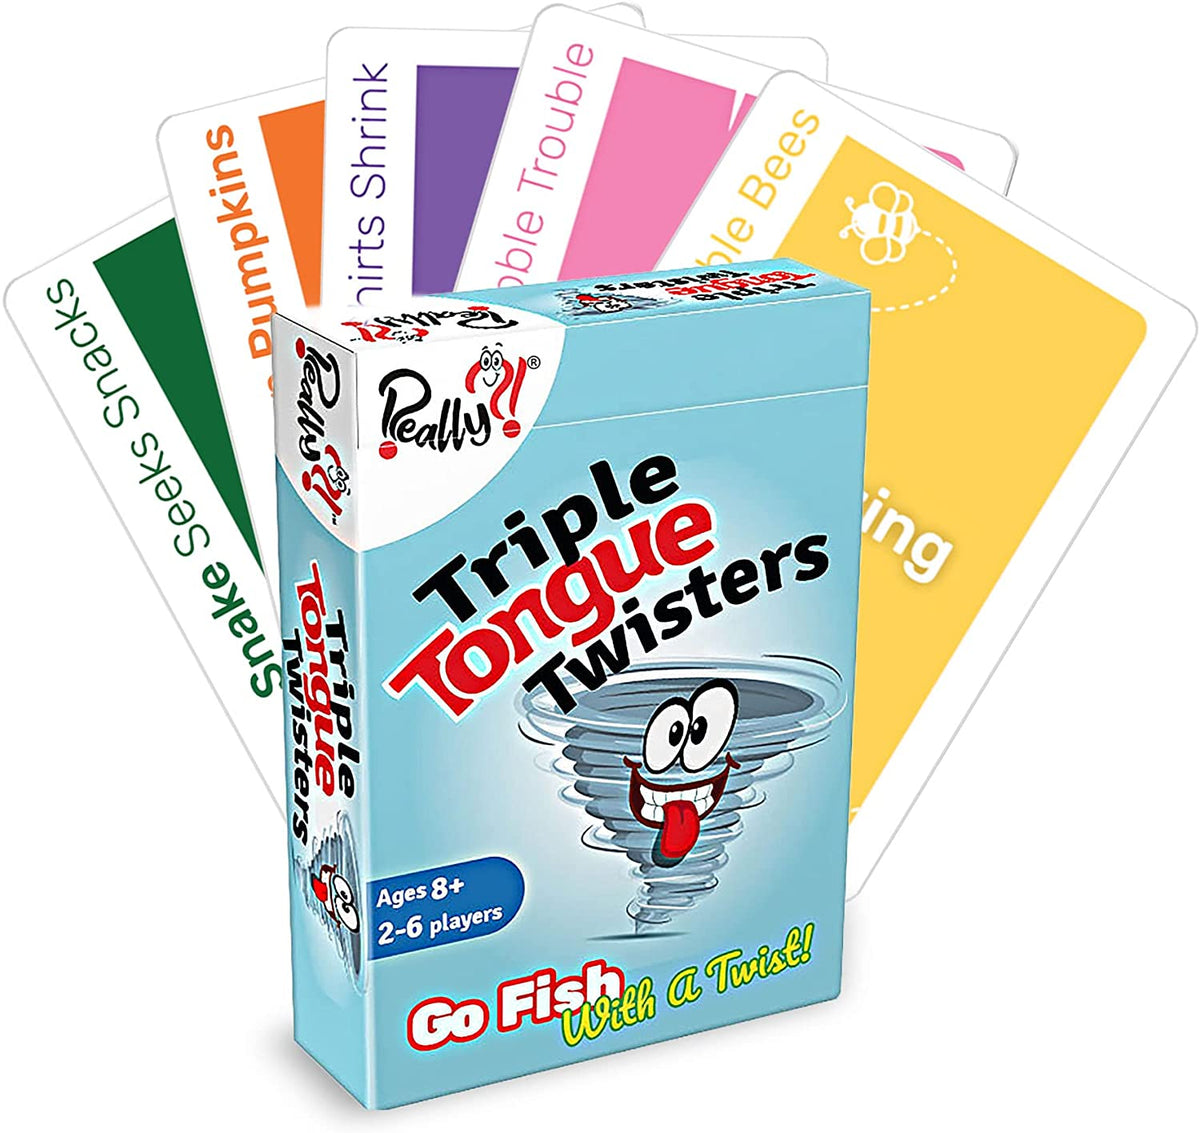 Tongue Twist'd Tongue Twister Board Game Games Hub Complete